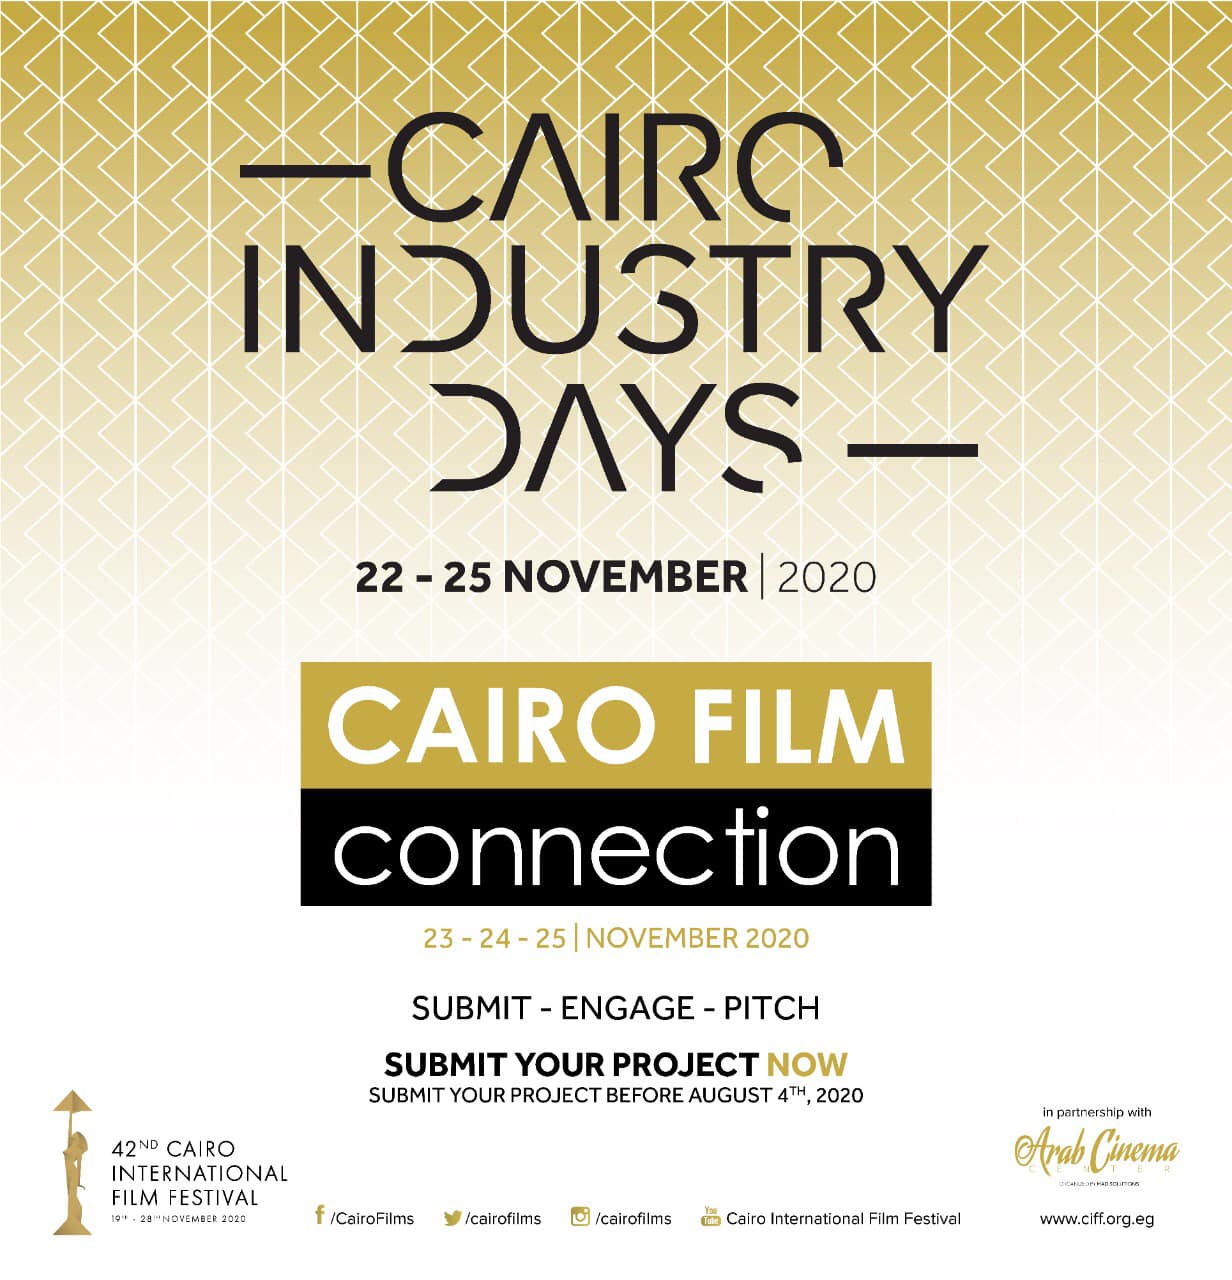 CIFF OPENS CALL FOR SUBMISSIONS FOR CAIRO FILM CONNECTION